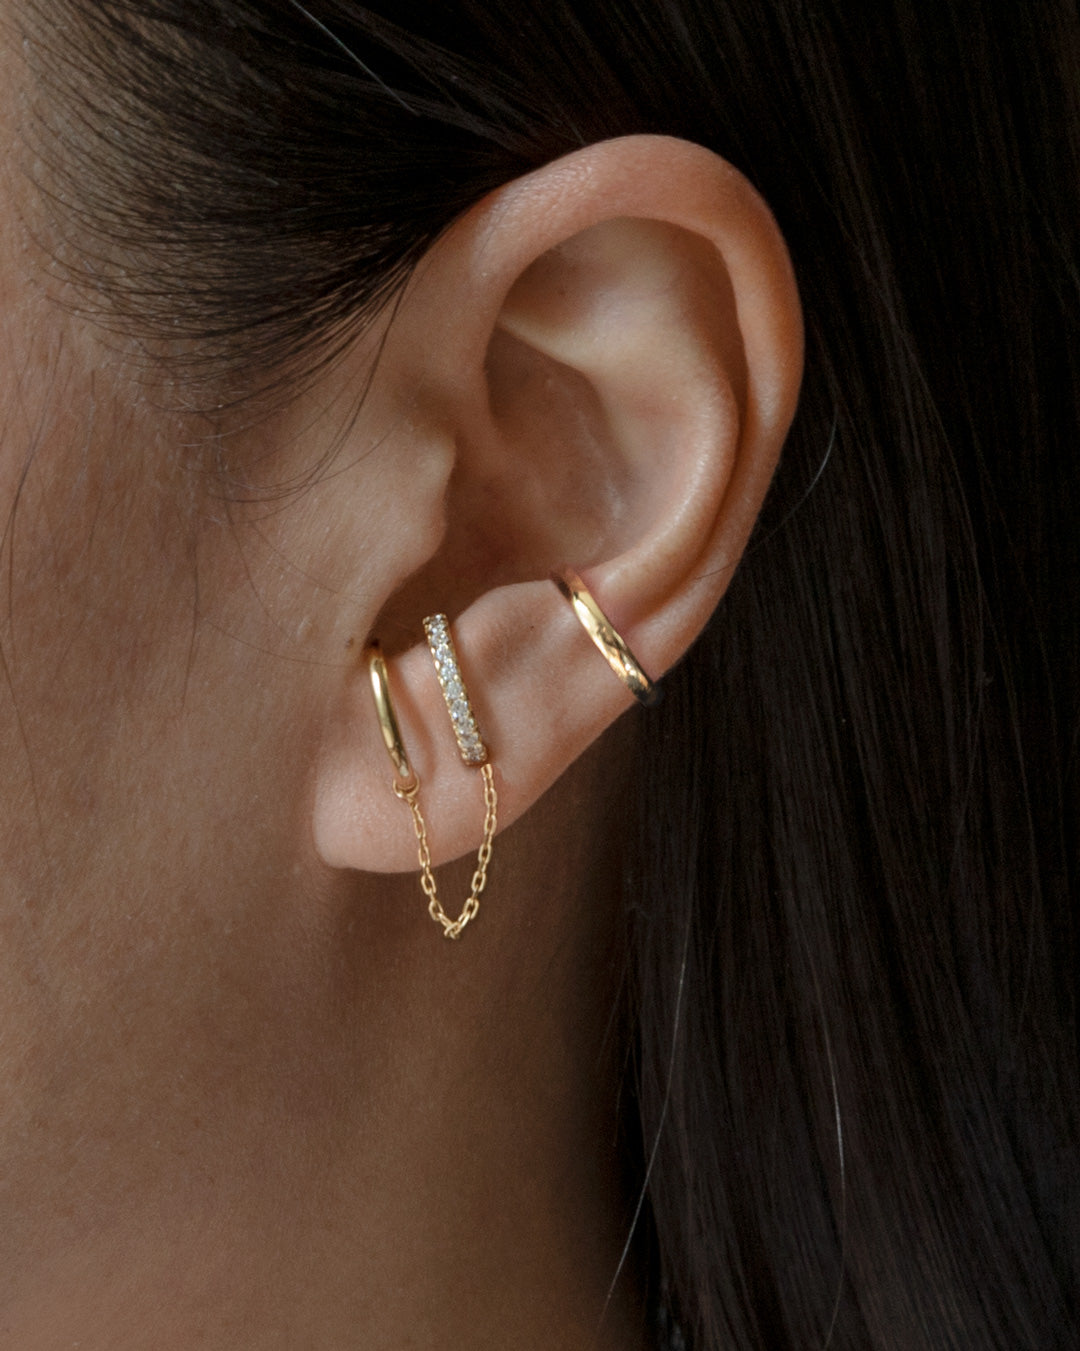 Ear Cuff with Hoops Attached for A Double Pierced Look